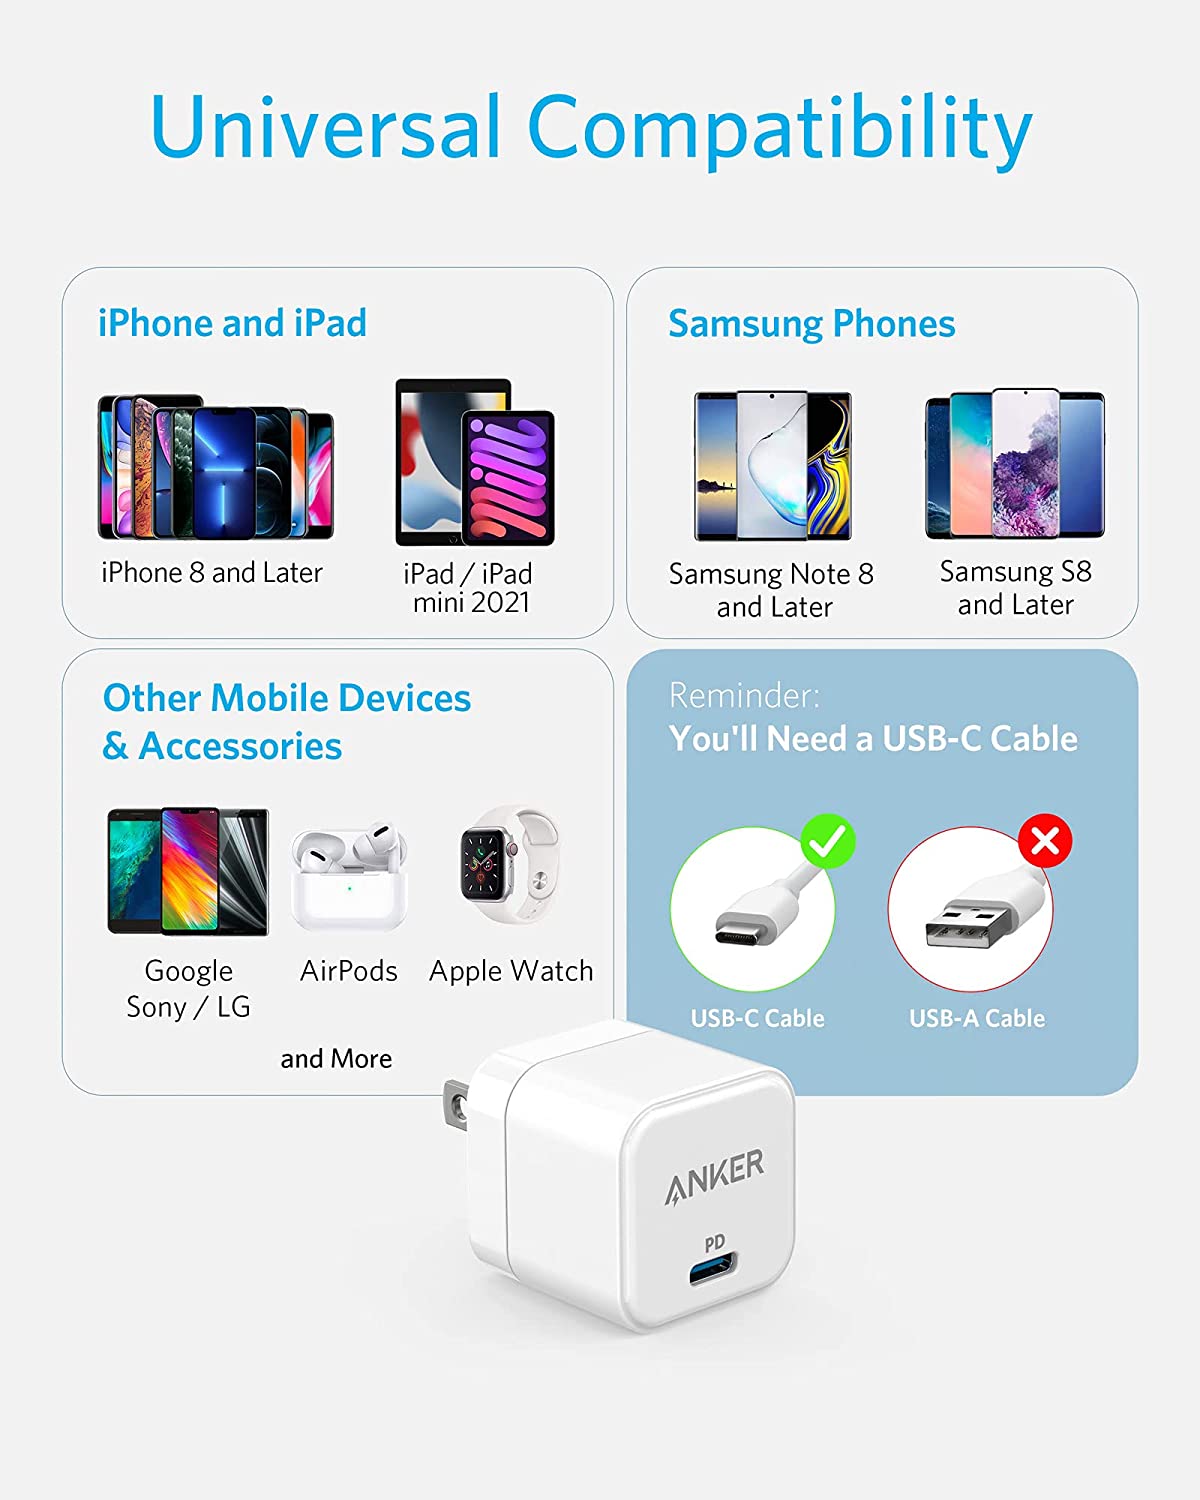 Anker USB C Charger, 20W Fast Charger with Foldable Plug, PowerPort III 20W Cube Charger